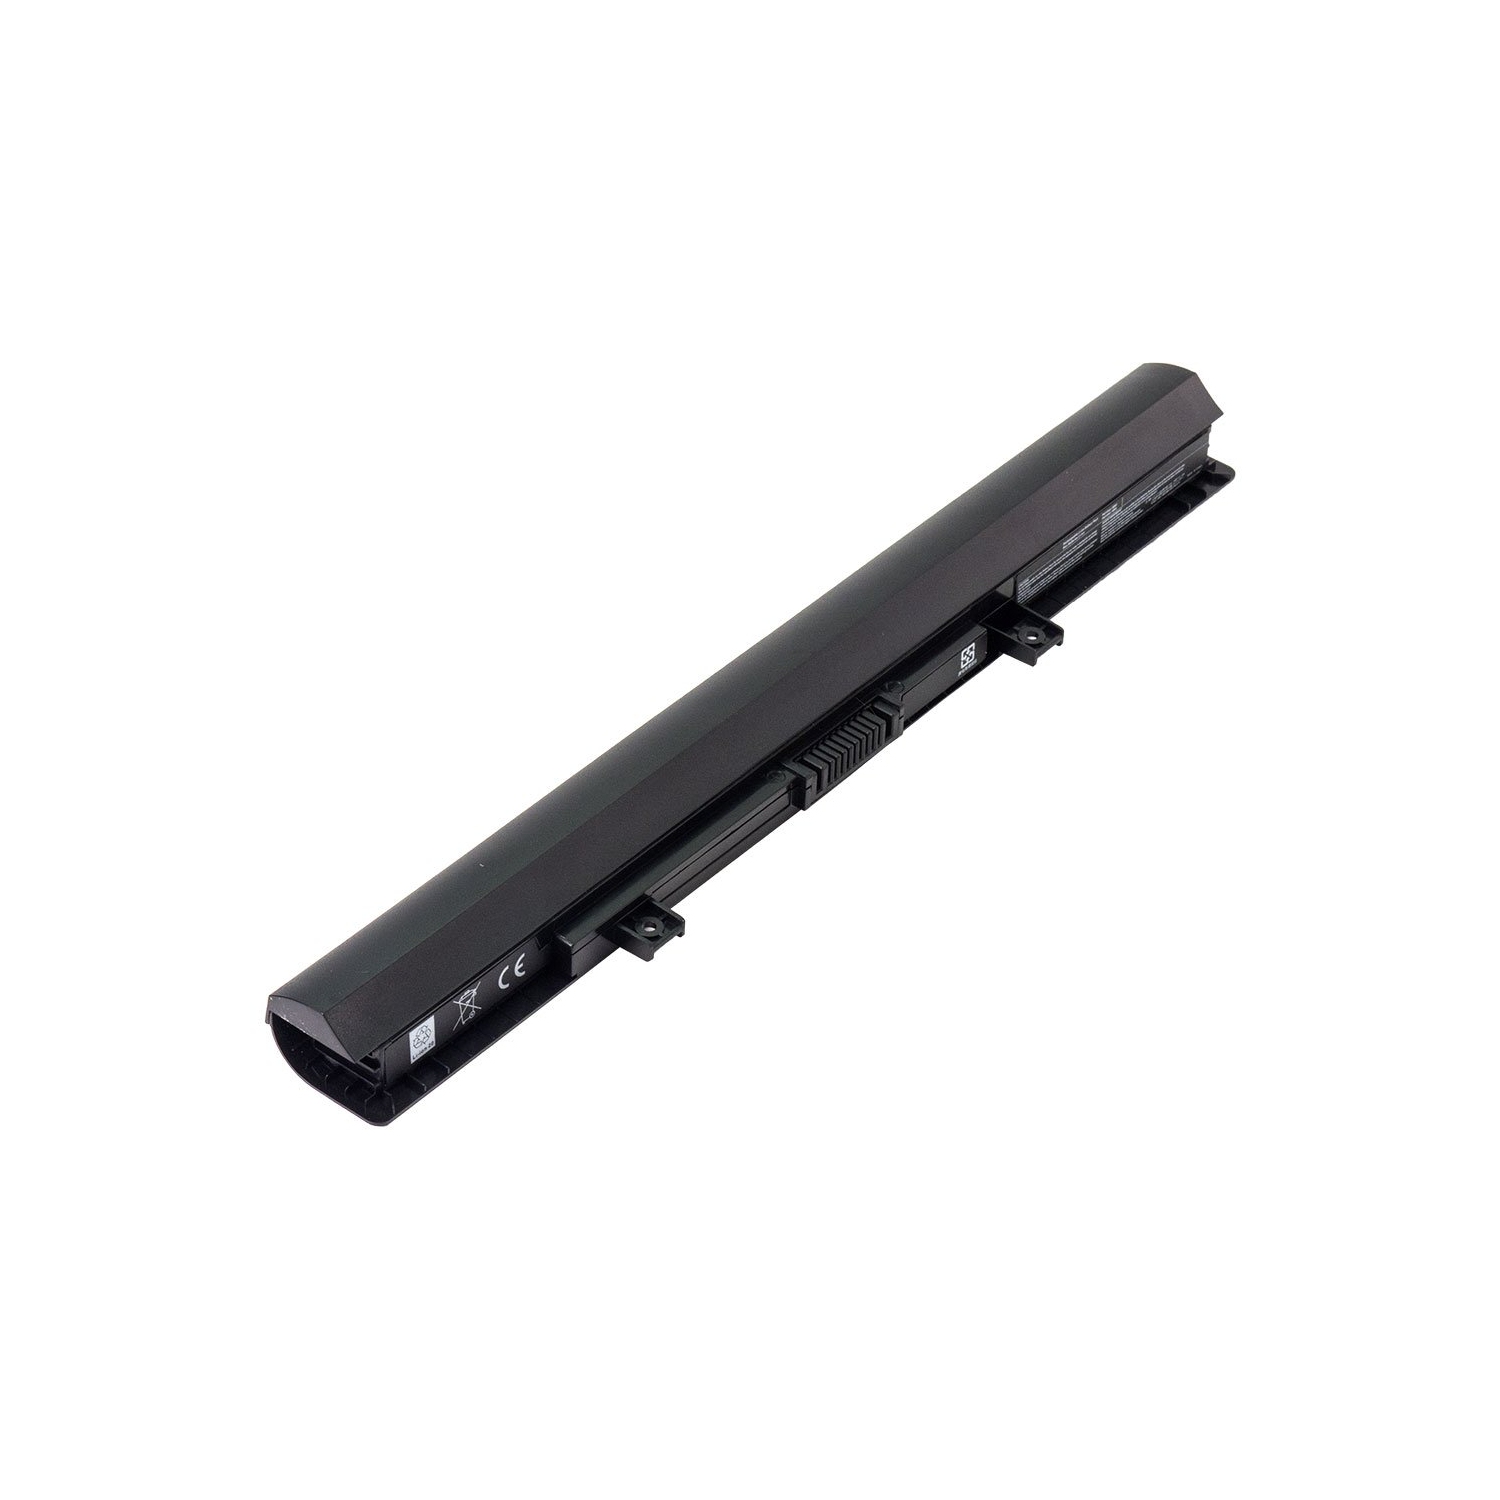 Laptop Battery Replacement for Toshiba Satellite C70-C-17J, PA5184U-1BRS, PA5185U, PA5185U-1BRS, PA5186U-1BRS, PA5195U-1BRS